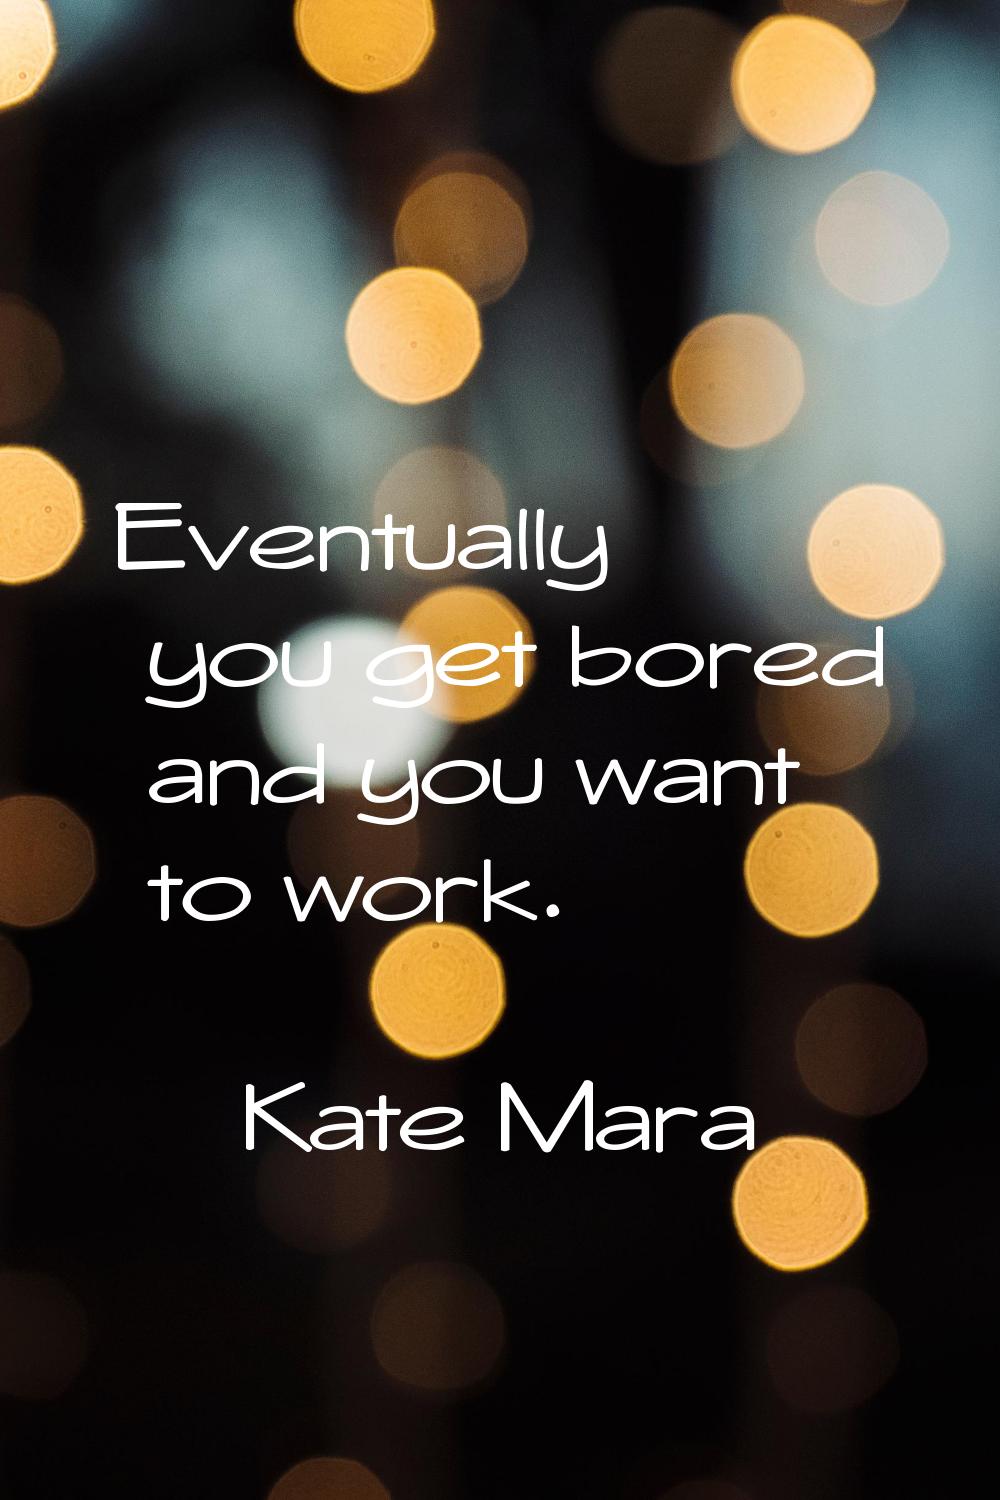 Eventually you get bored and you want to work.